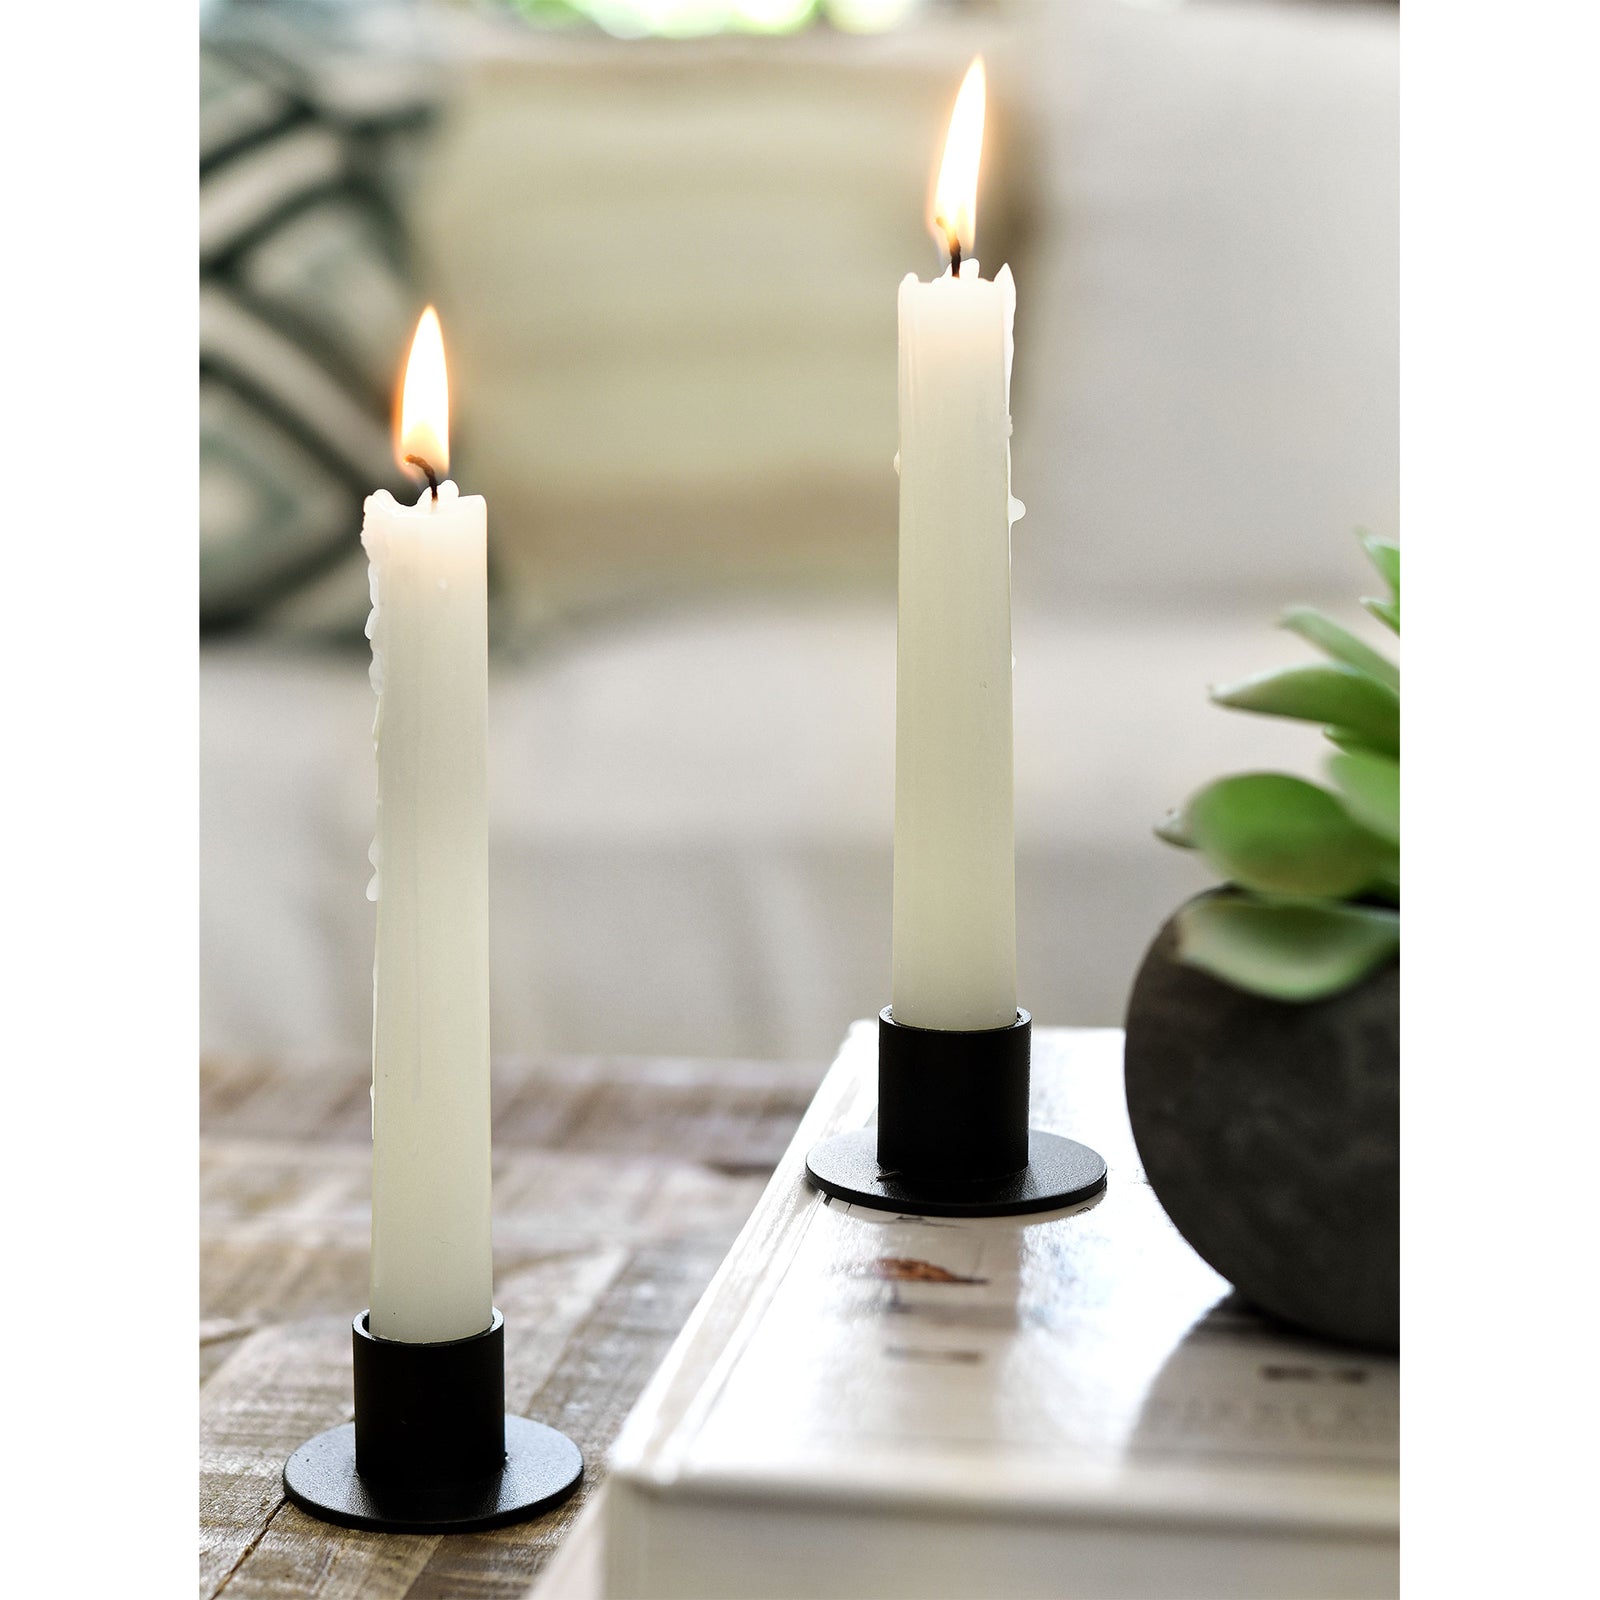 4 Black Plated Iron Candle Holders with Round Base for Taper Wax Candlesticks